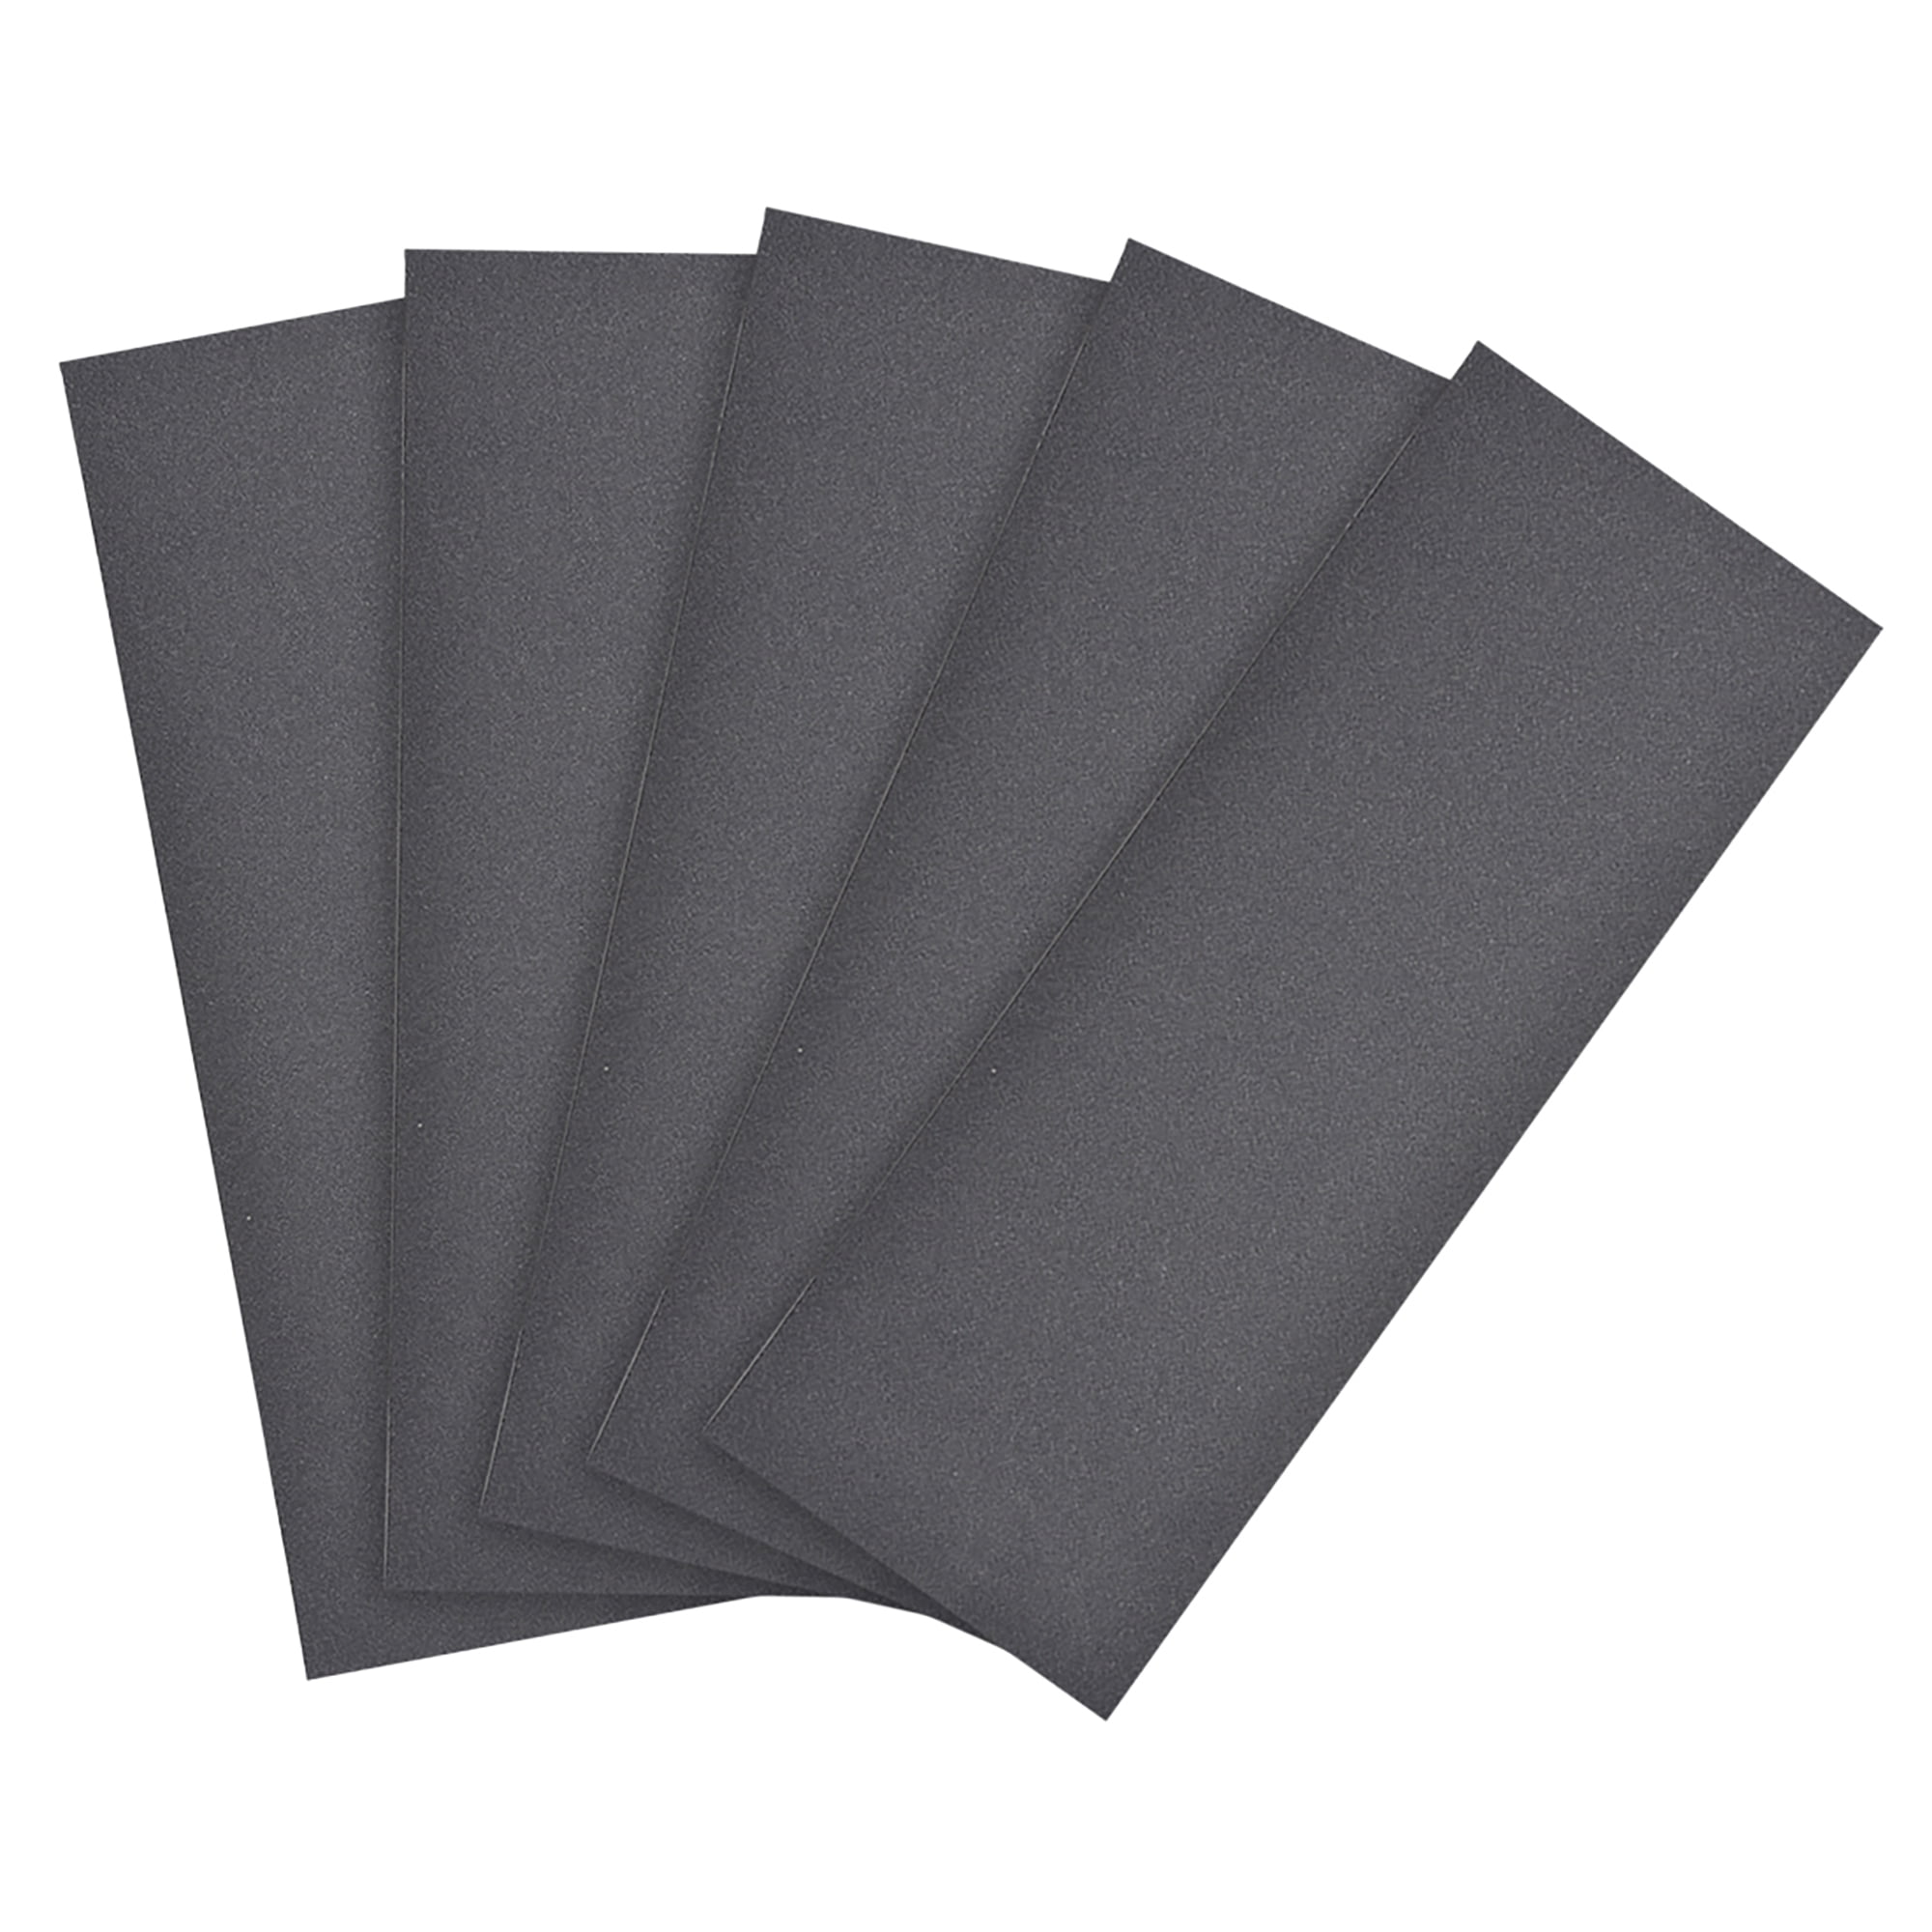 5 Sheets Premium Latex Backed Sandpaper Wet Dry 9" x 5.5"  80-2000 grits 